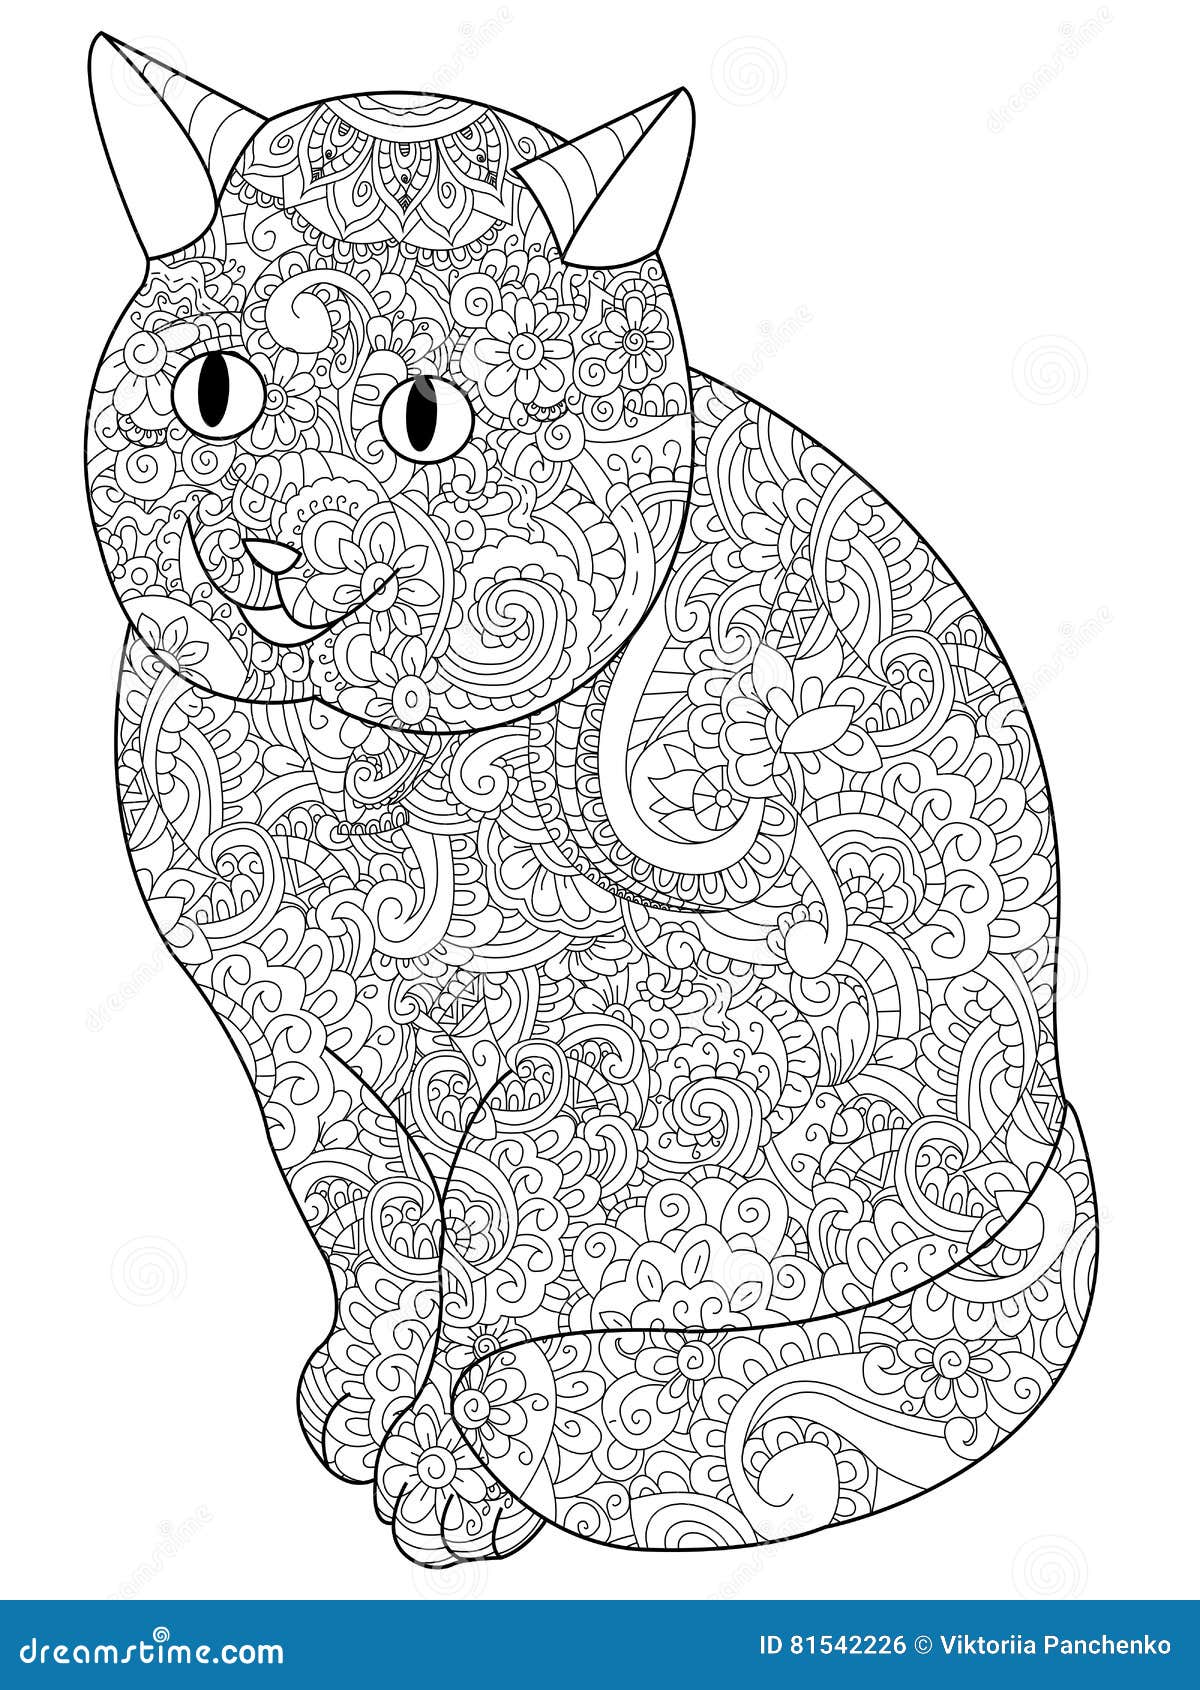 Cat Coloring Book Vector for Adults Stock Vector - Illustration of